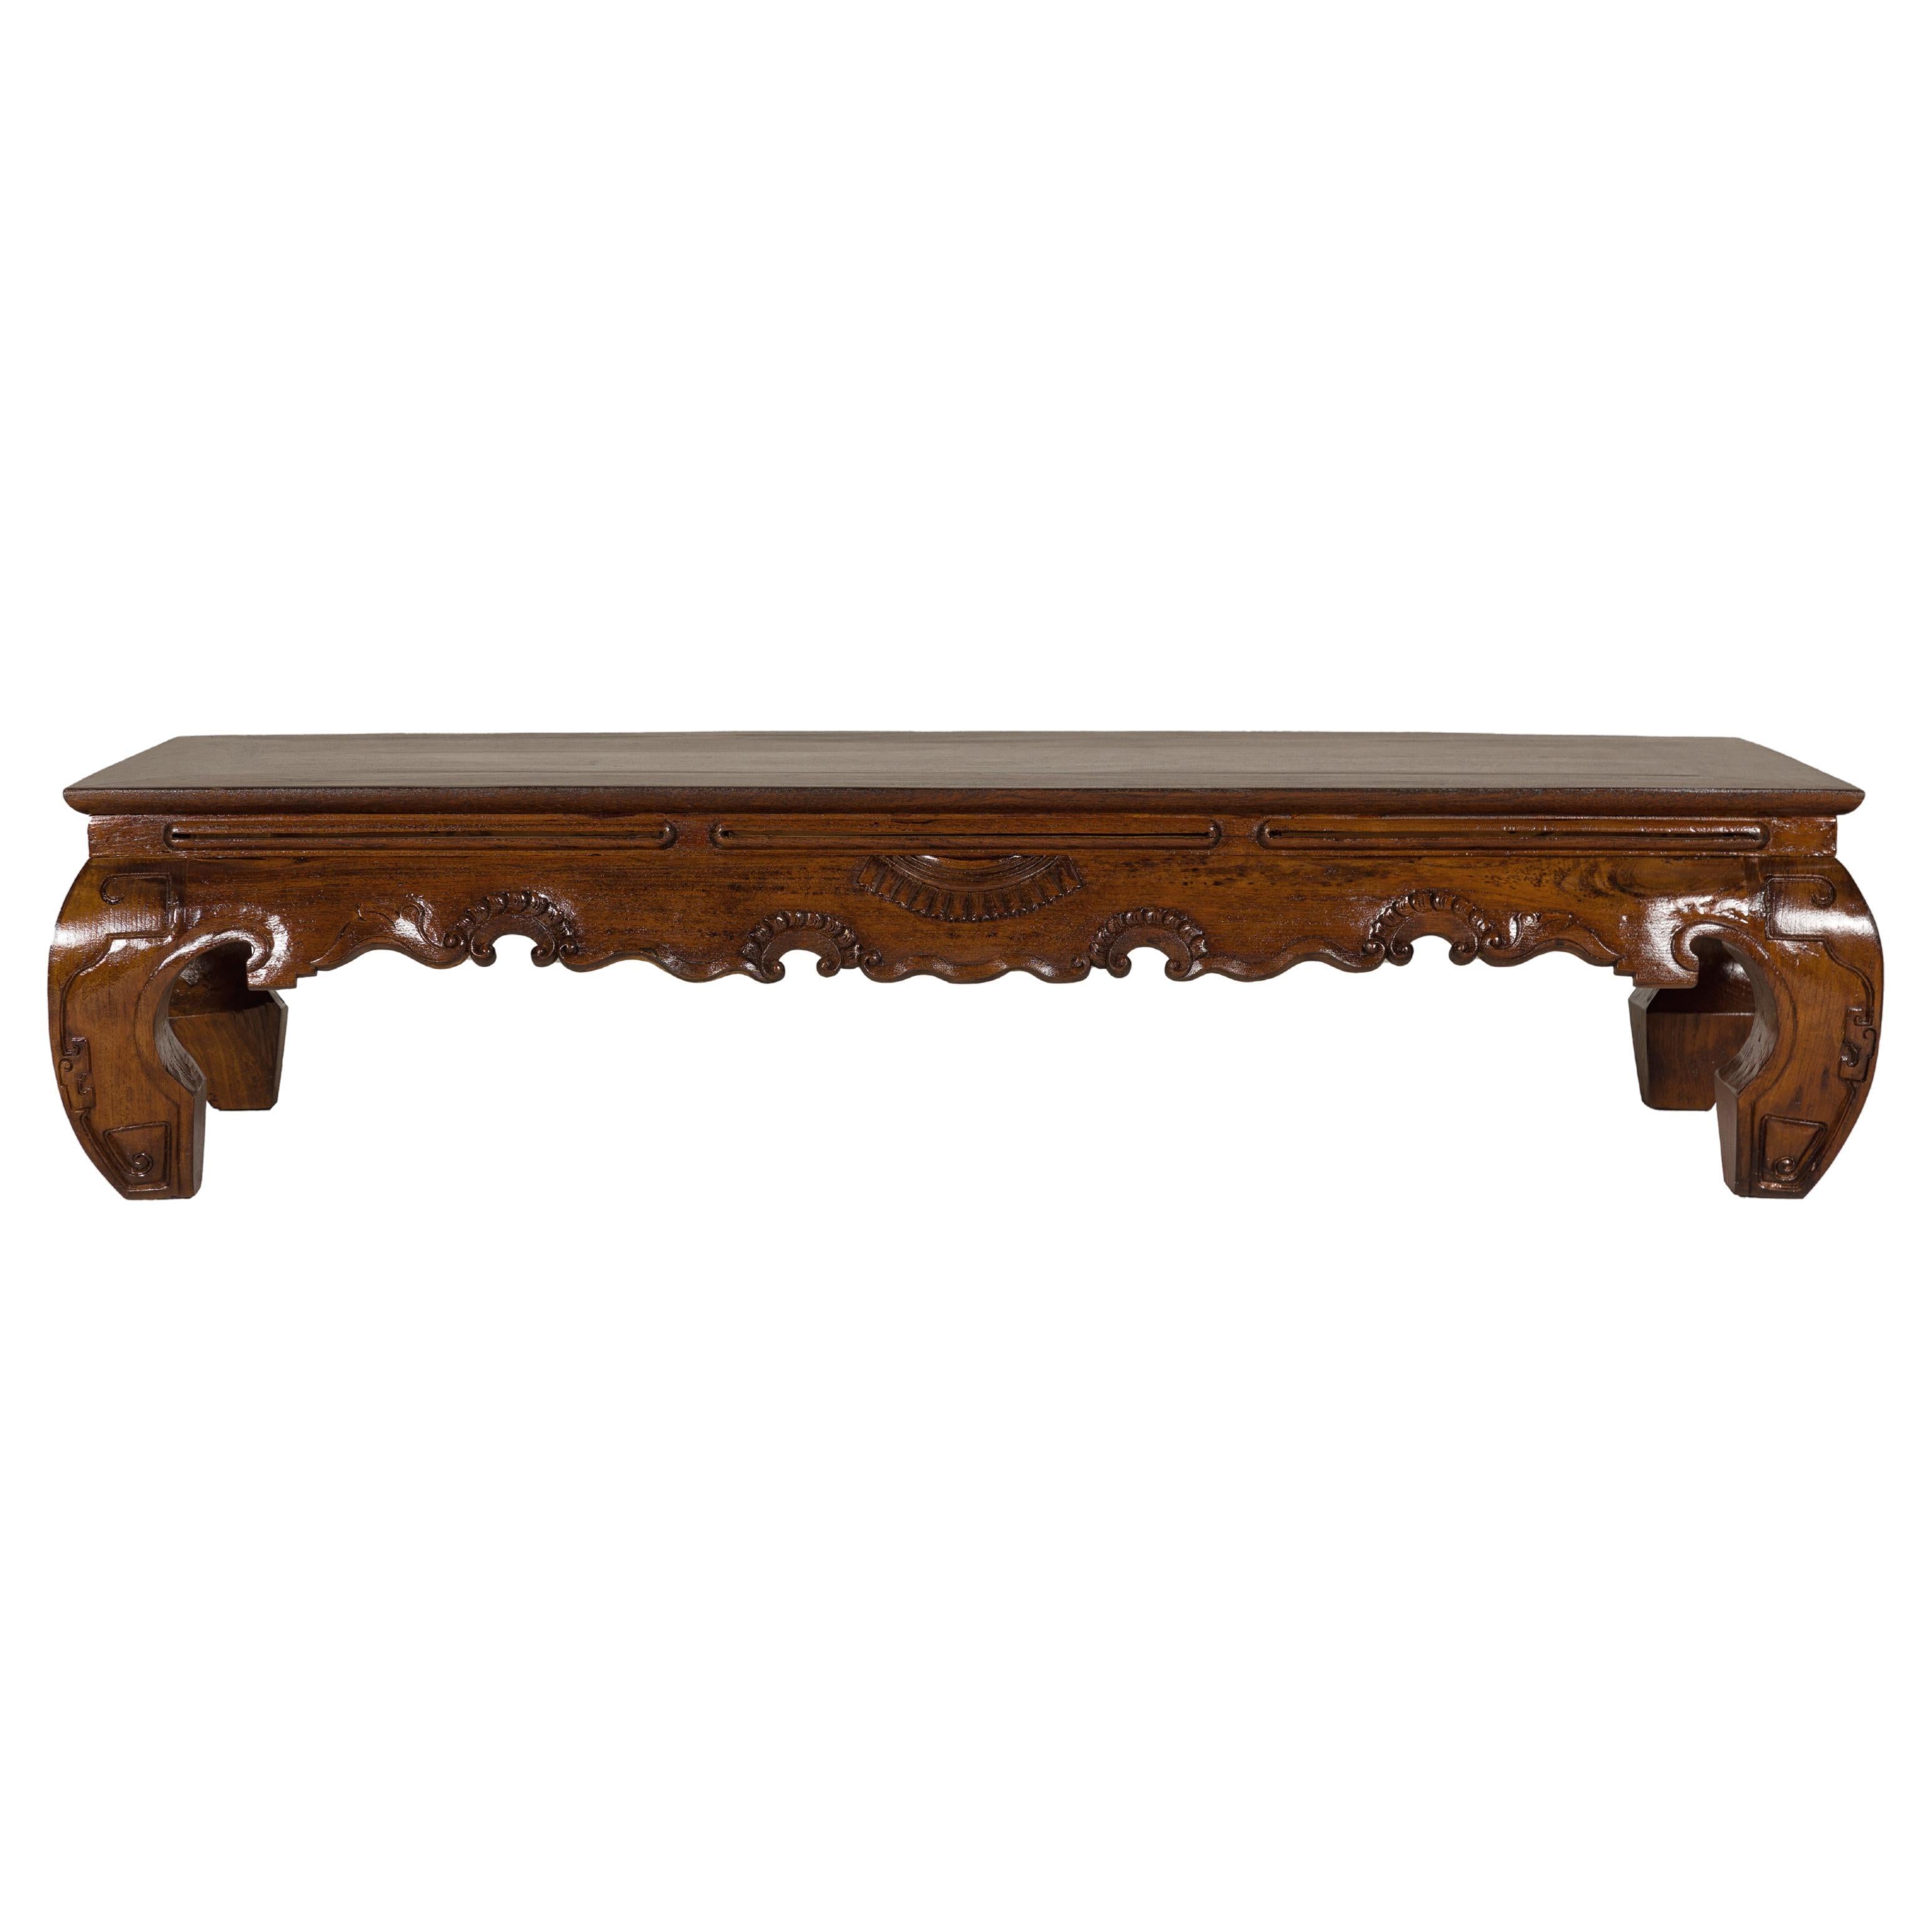 19th Century Lacquered Coffee Table with Hand-Carved Apron and Chow Legs For Sale